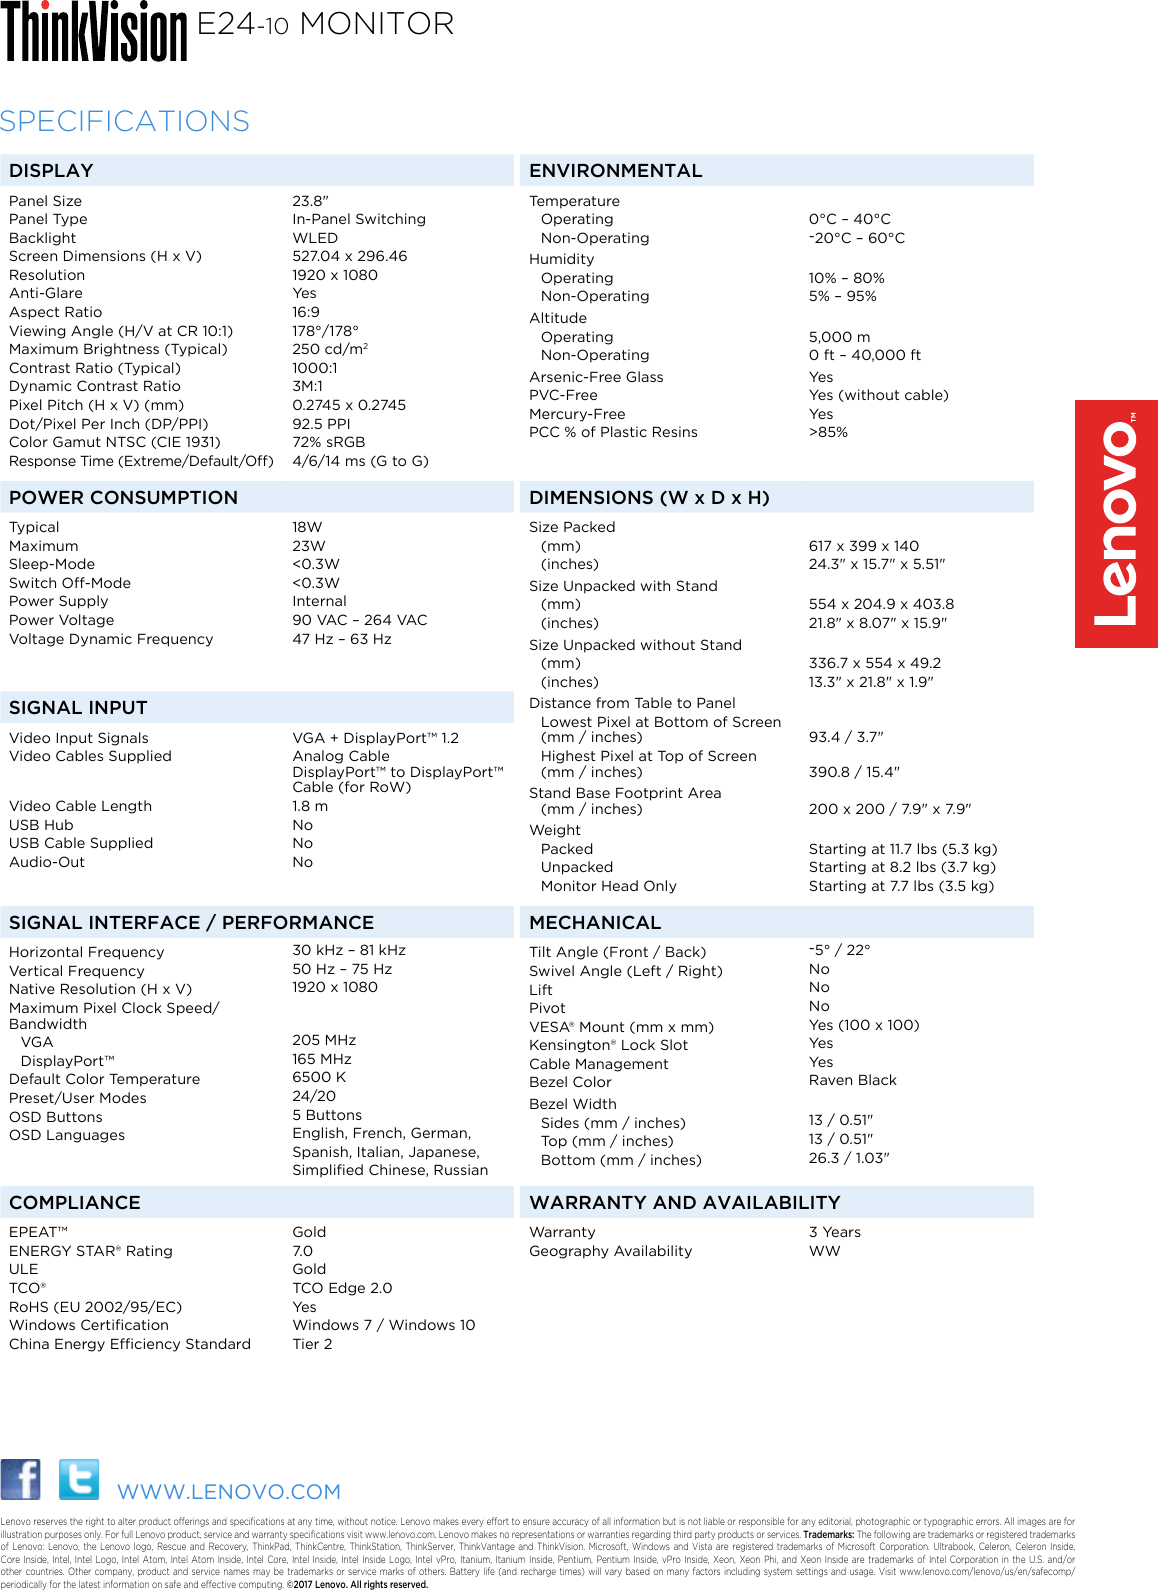 Page 2 of 2 - Lenovo E24 10 Overview ThinkVision E24-10 Monitor User Manual Think Vision 23.8” Wide FHD In Plane Switching - Type 61B7